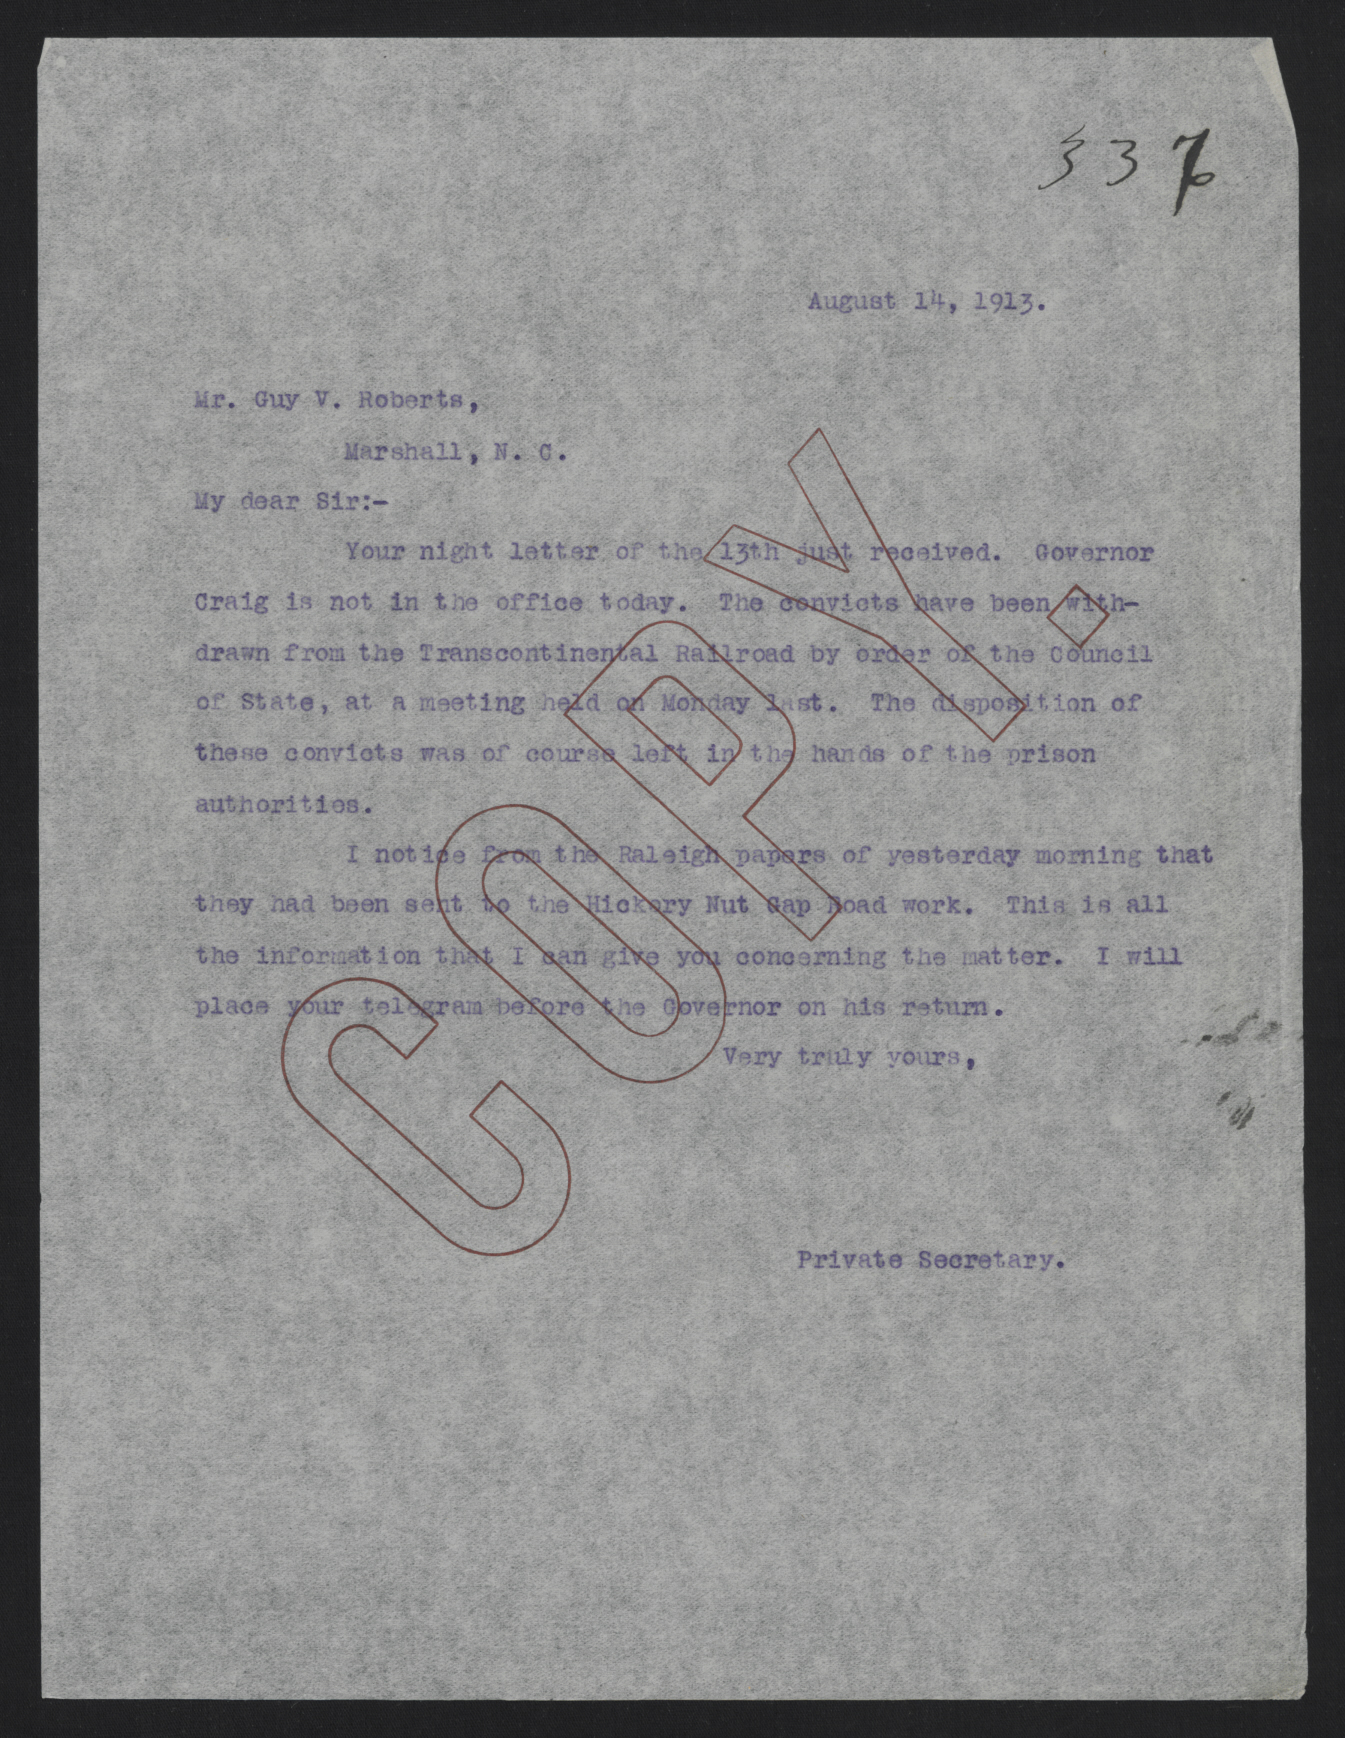 Letter from Kerr to Roberts, August 14, 1913